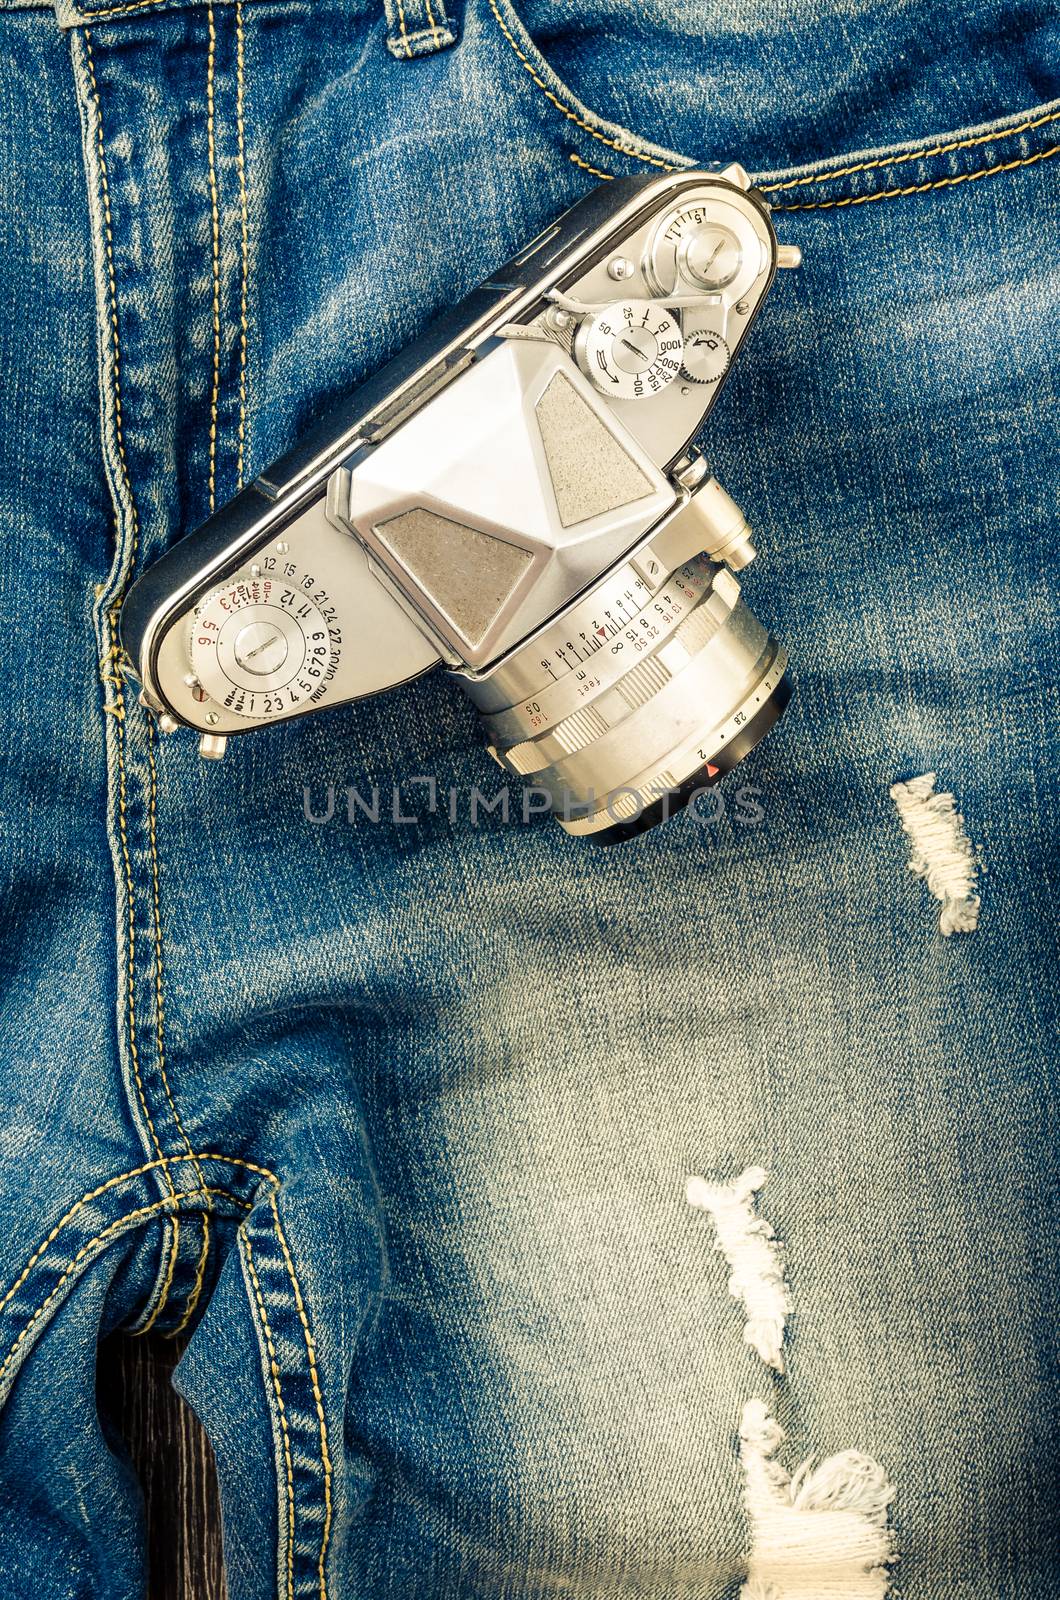 Close-up detail of vintage jeans with classic camera by martinm303